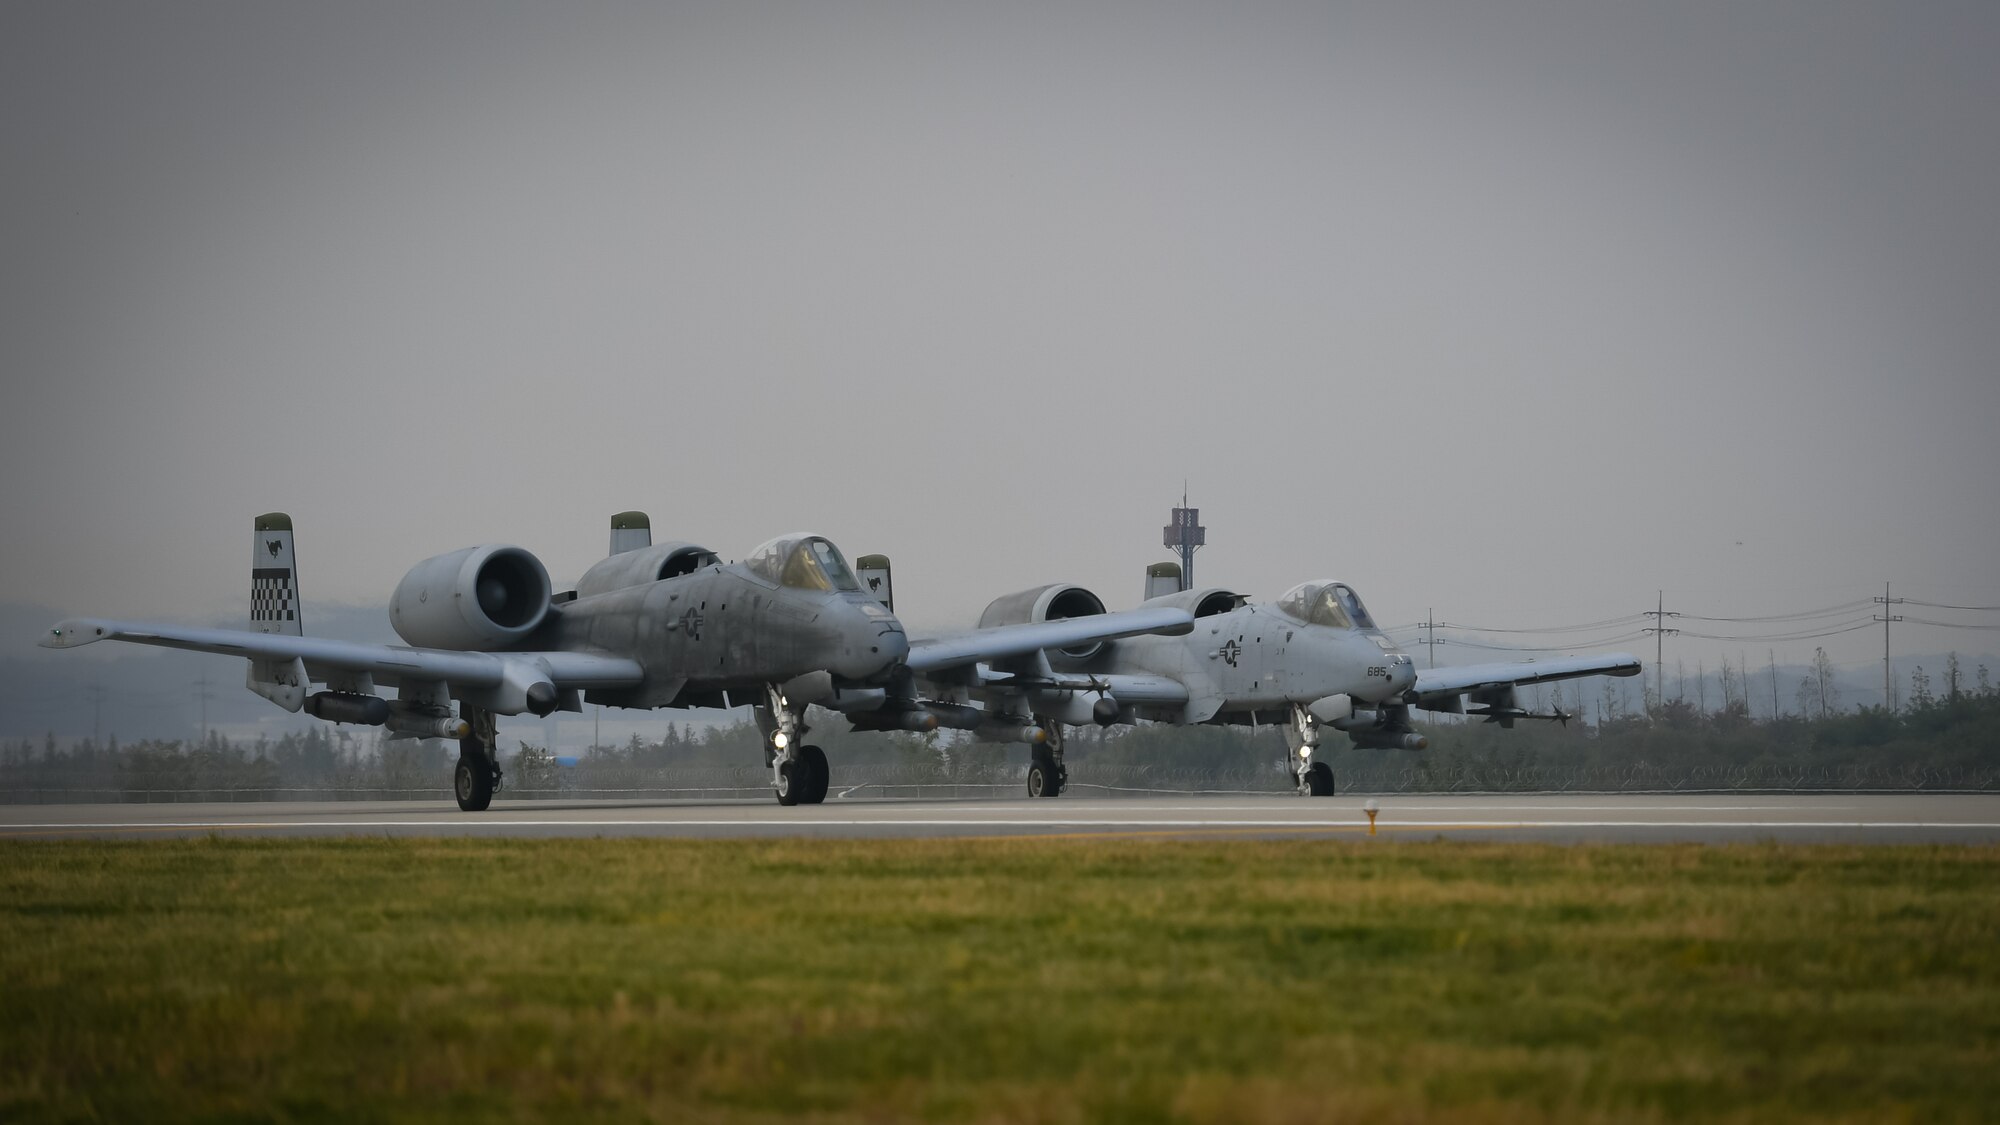 A U.S. Air Force A-10 Thunderbolt II from the 25th Fighter Squadron prepares to take off at Osan Air Base, Republic of Korea, Oct. 22, 2018. A-10s participated in routine training aimed at sharpening skills needed for search and rescue operations.